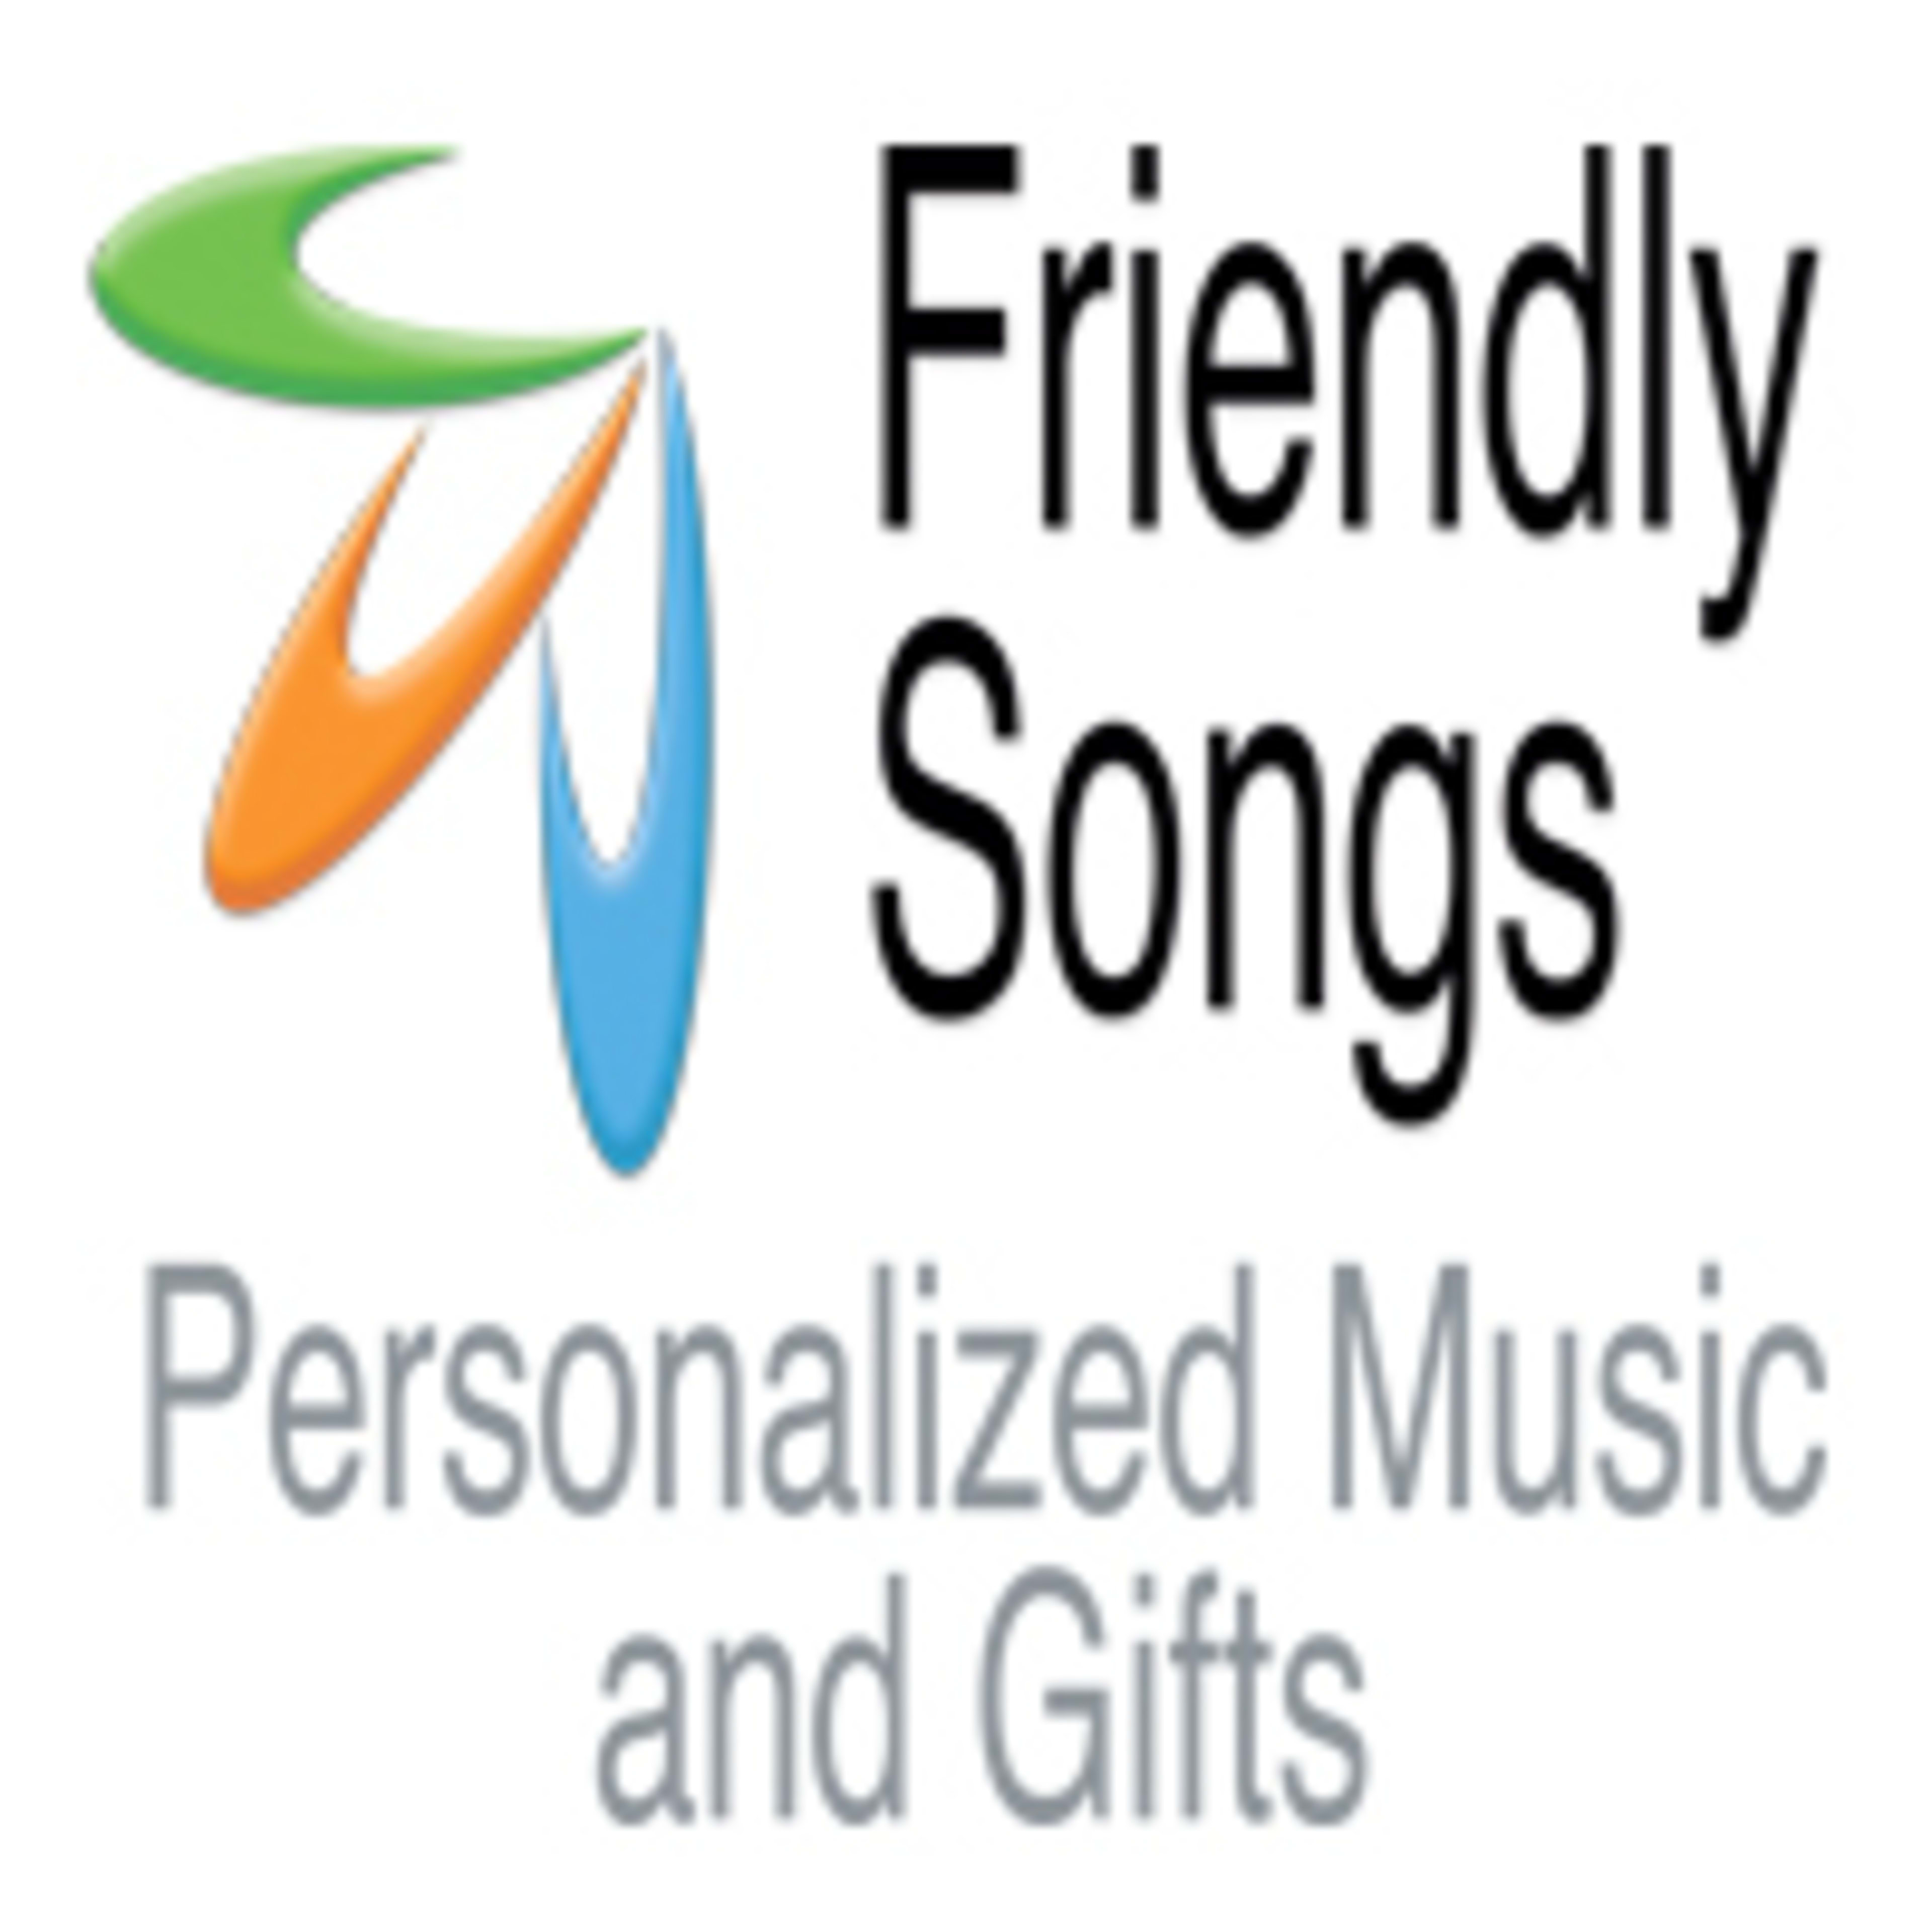 Personalized Friendly SongsCode